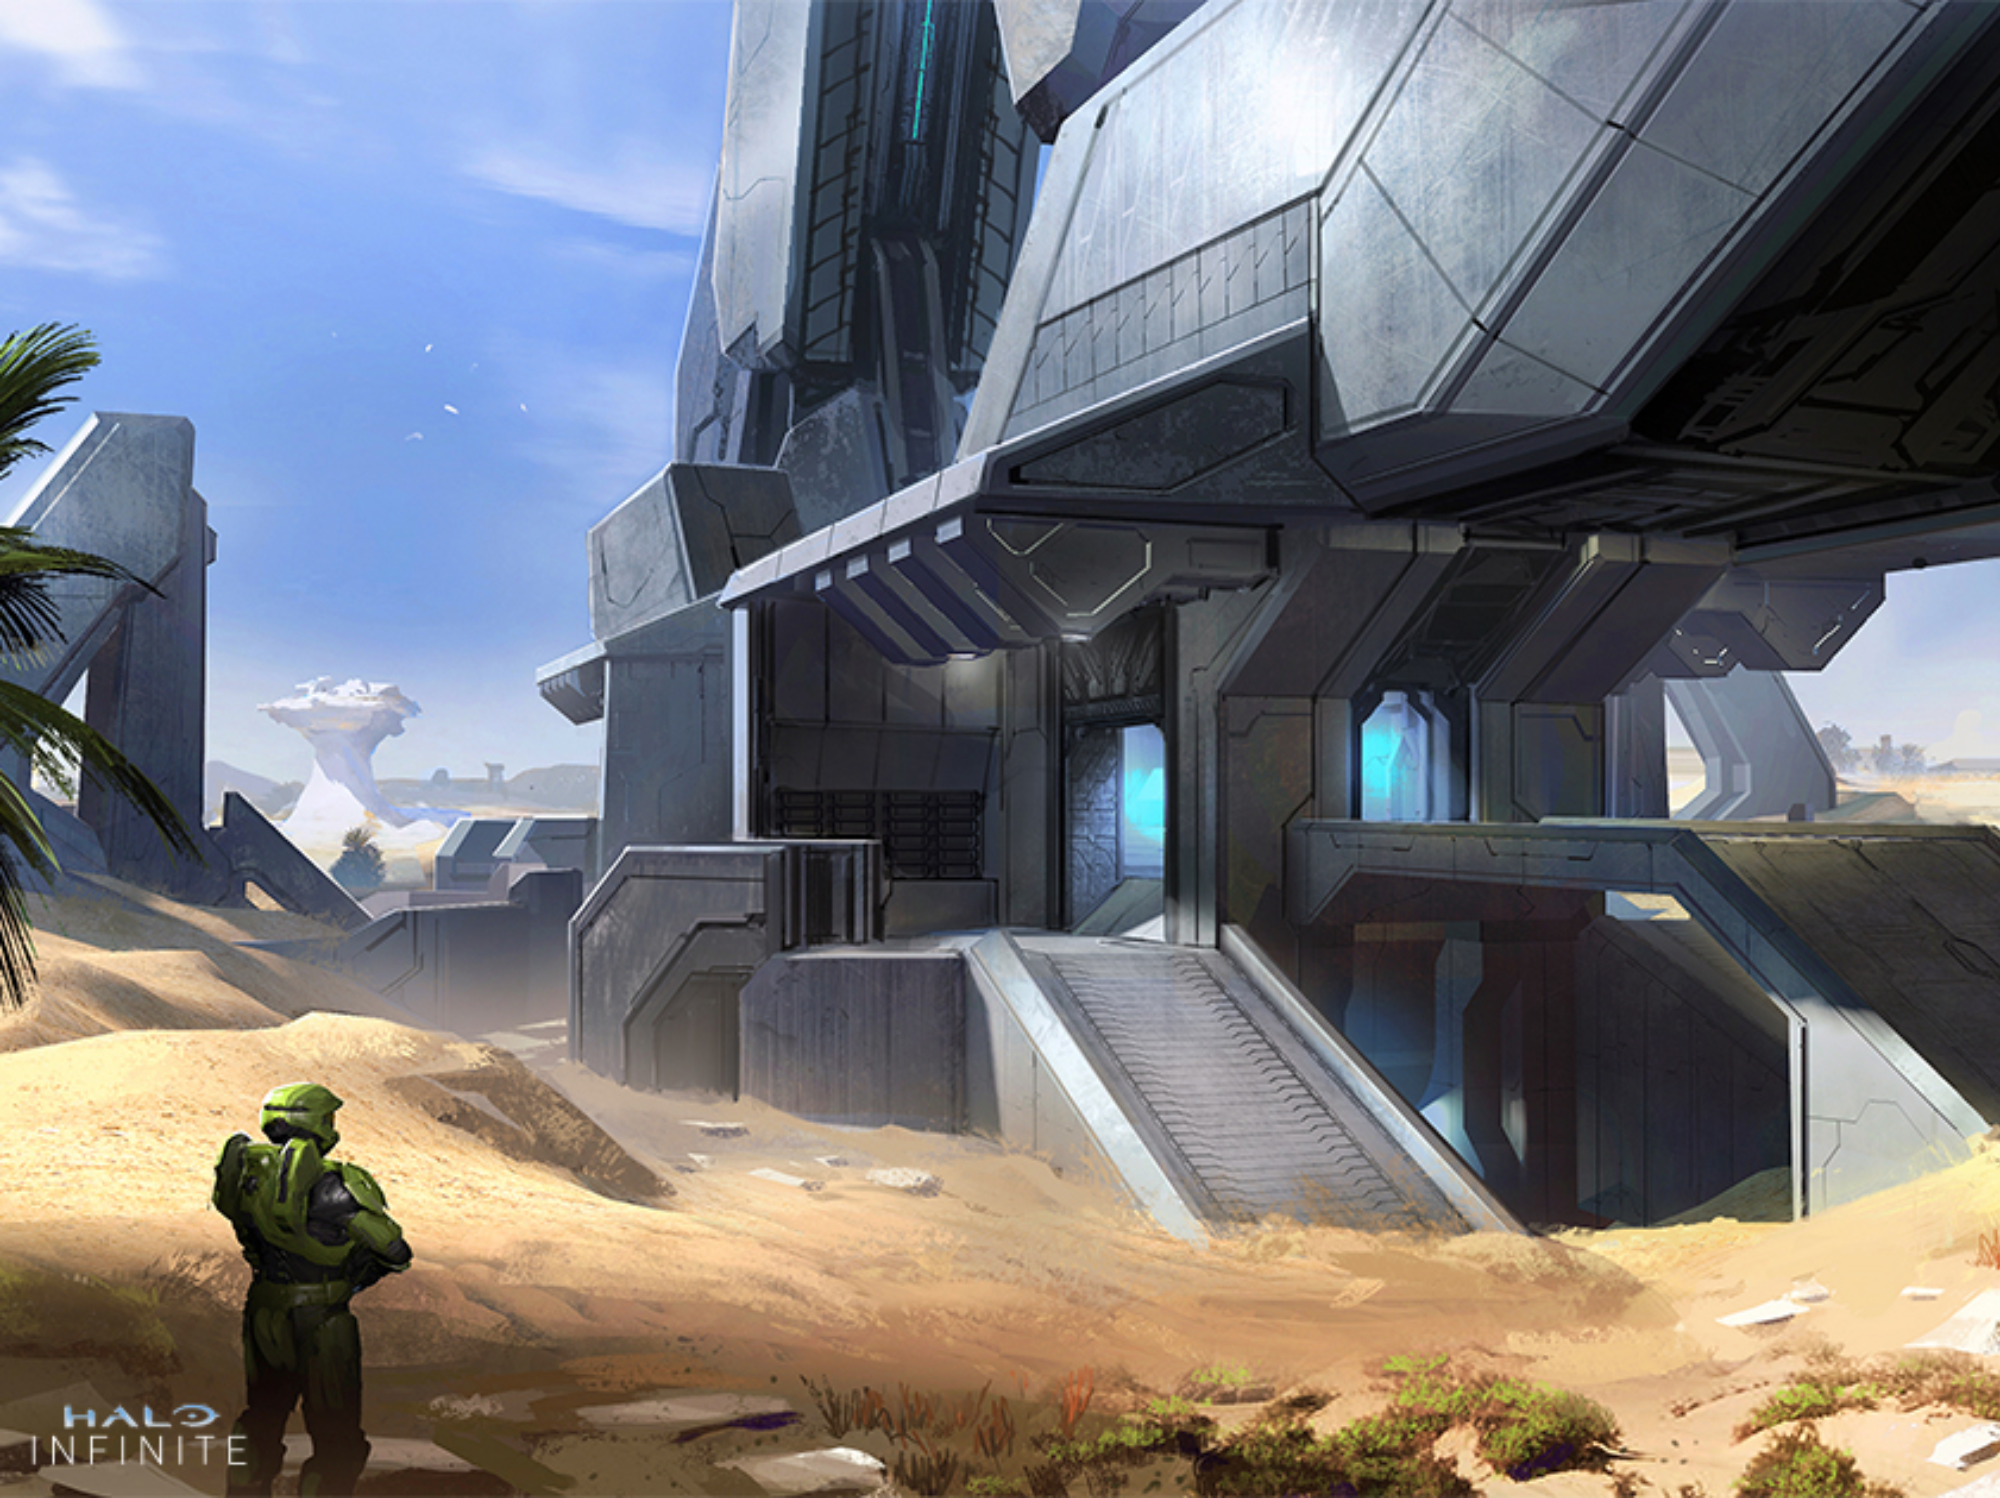 Halo Infinite Spotlight | Tech Preview 2 invites go out for a back-to-back weekend of Arena and Big Team Battle multiplayer mayhem